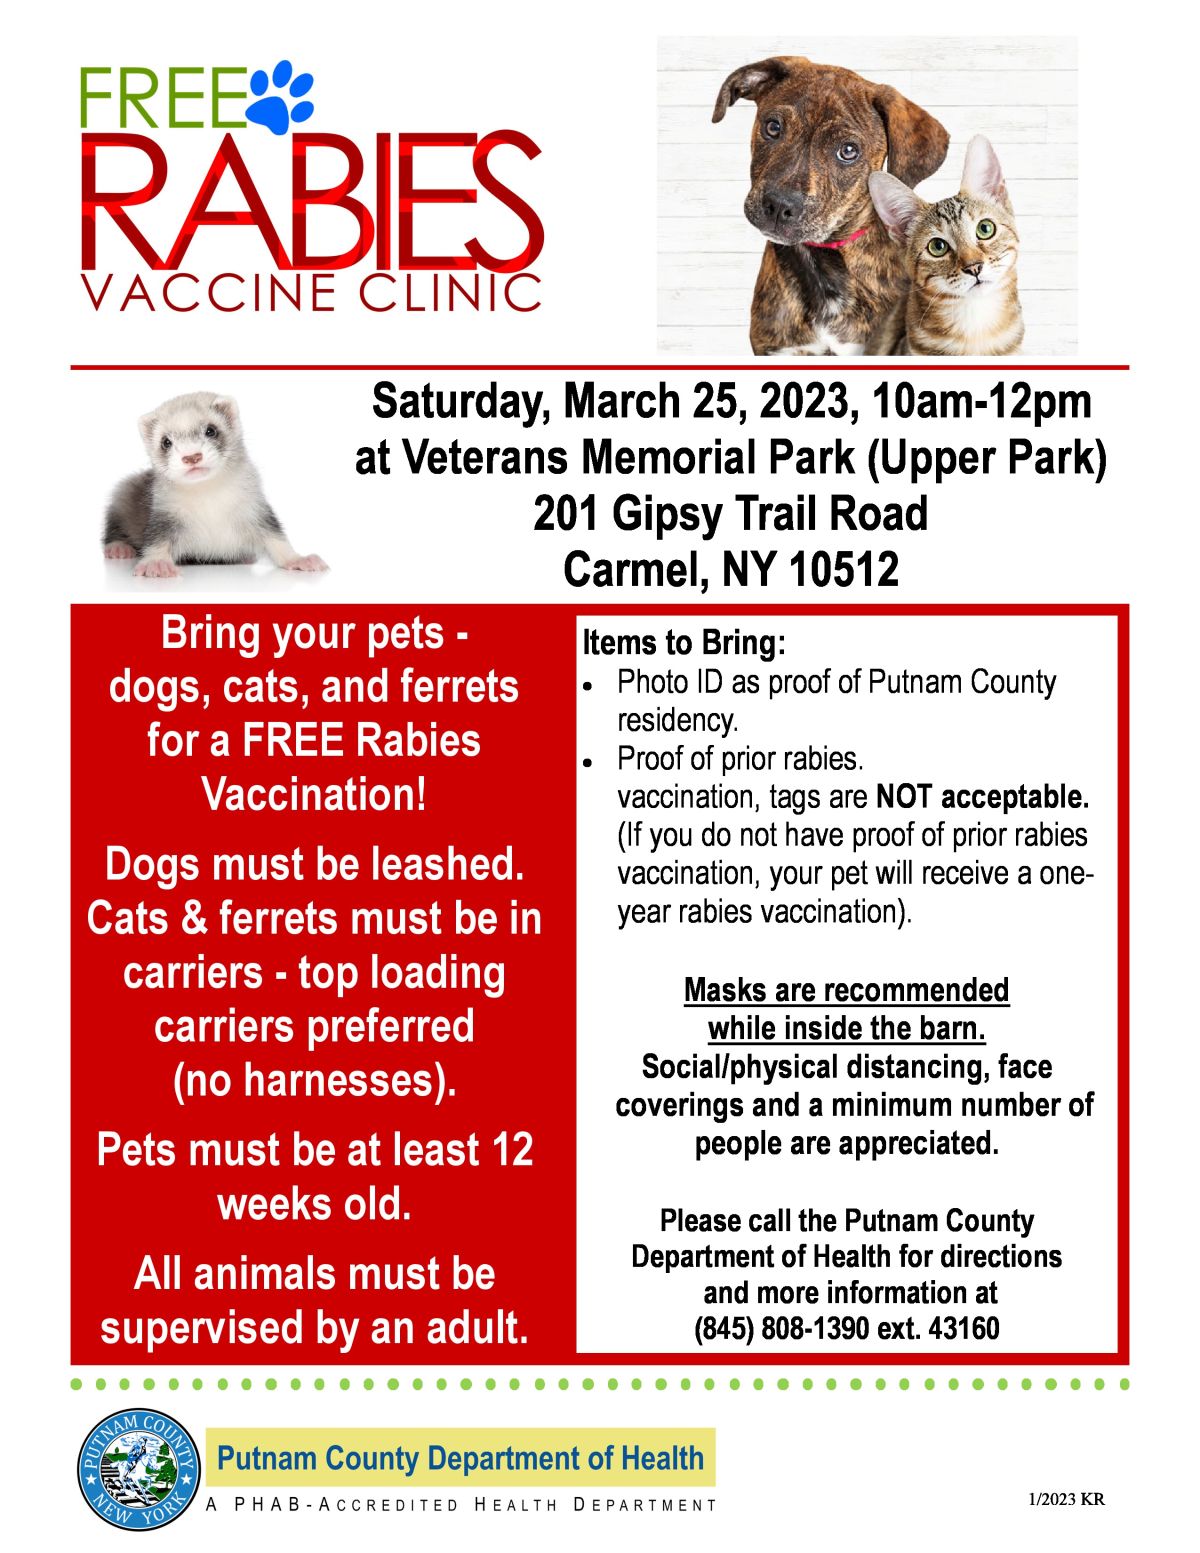 PCDOH Schedules Free Rabies Vaccination Clinic Putnam County, New York